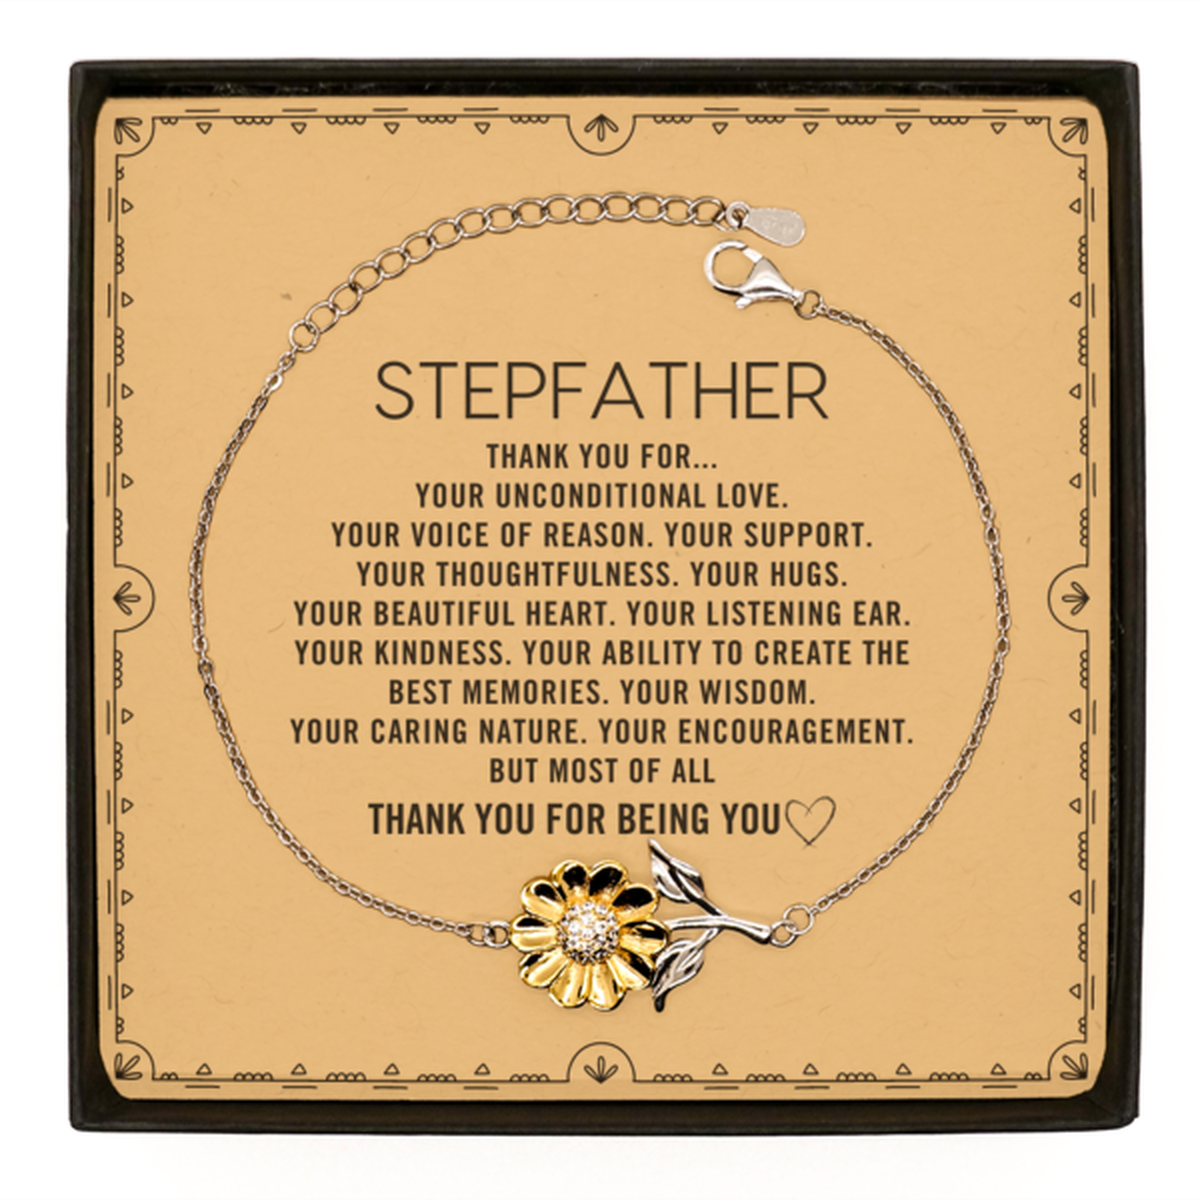 Stepfather Sunflower Bracelet Custom, Message Card Gifts For Stepfather Christmas Graduation Birthday Gifts for Men Women Stepfather Thank you for Your unconditional love